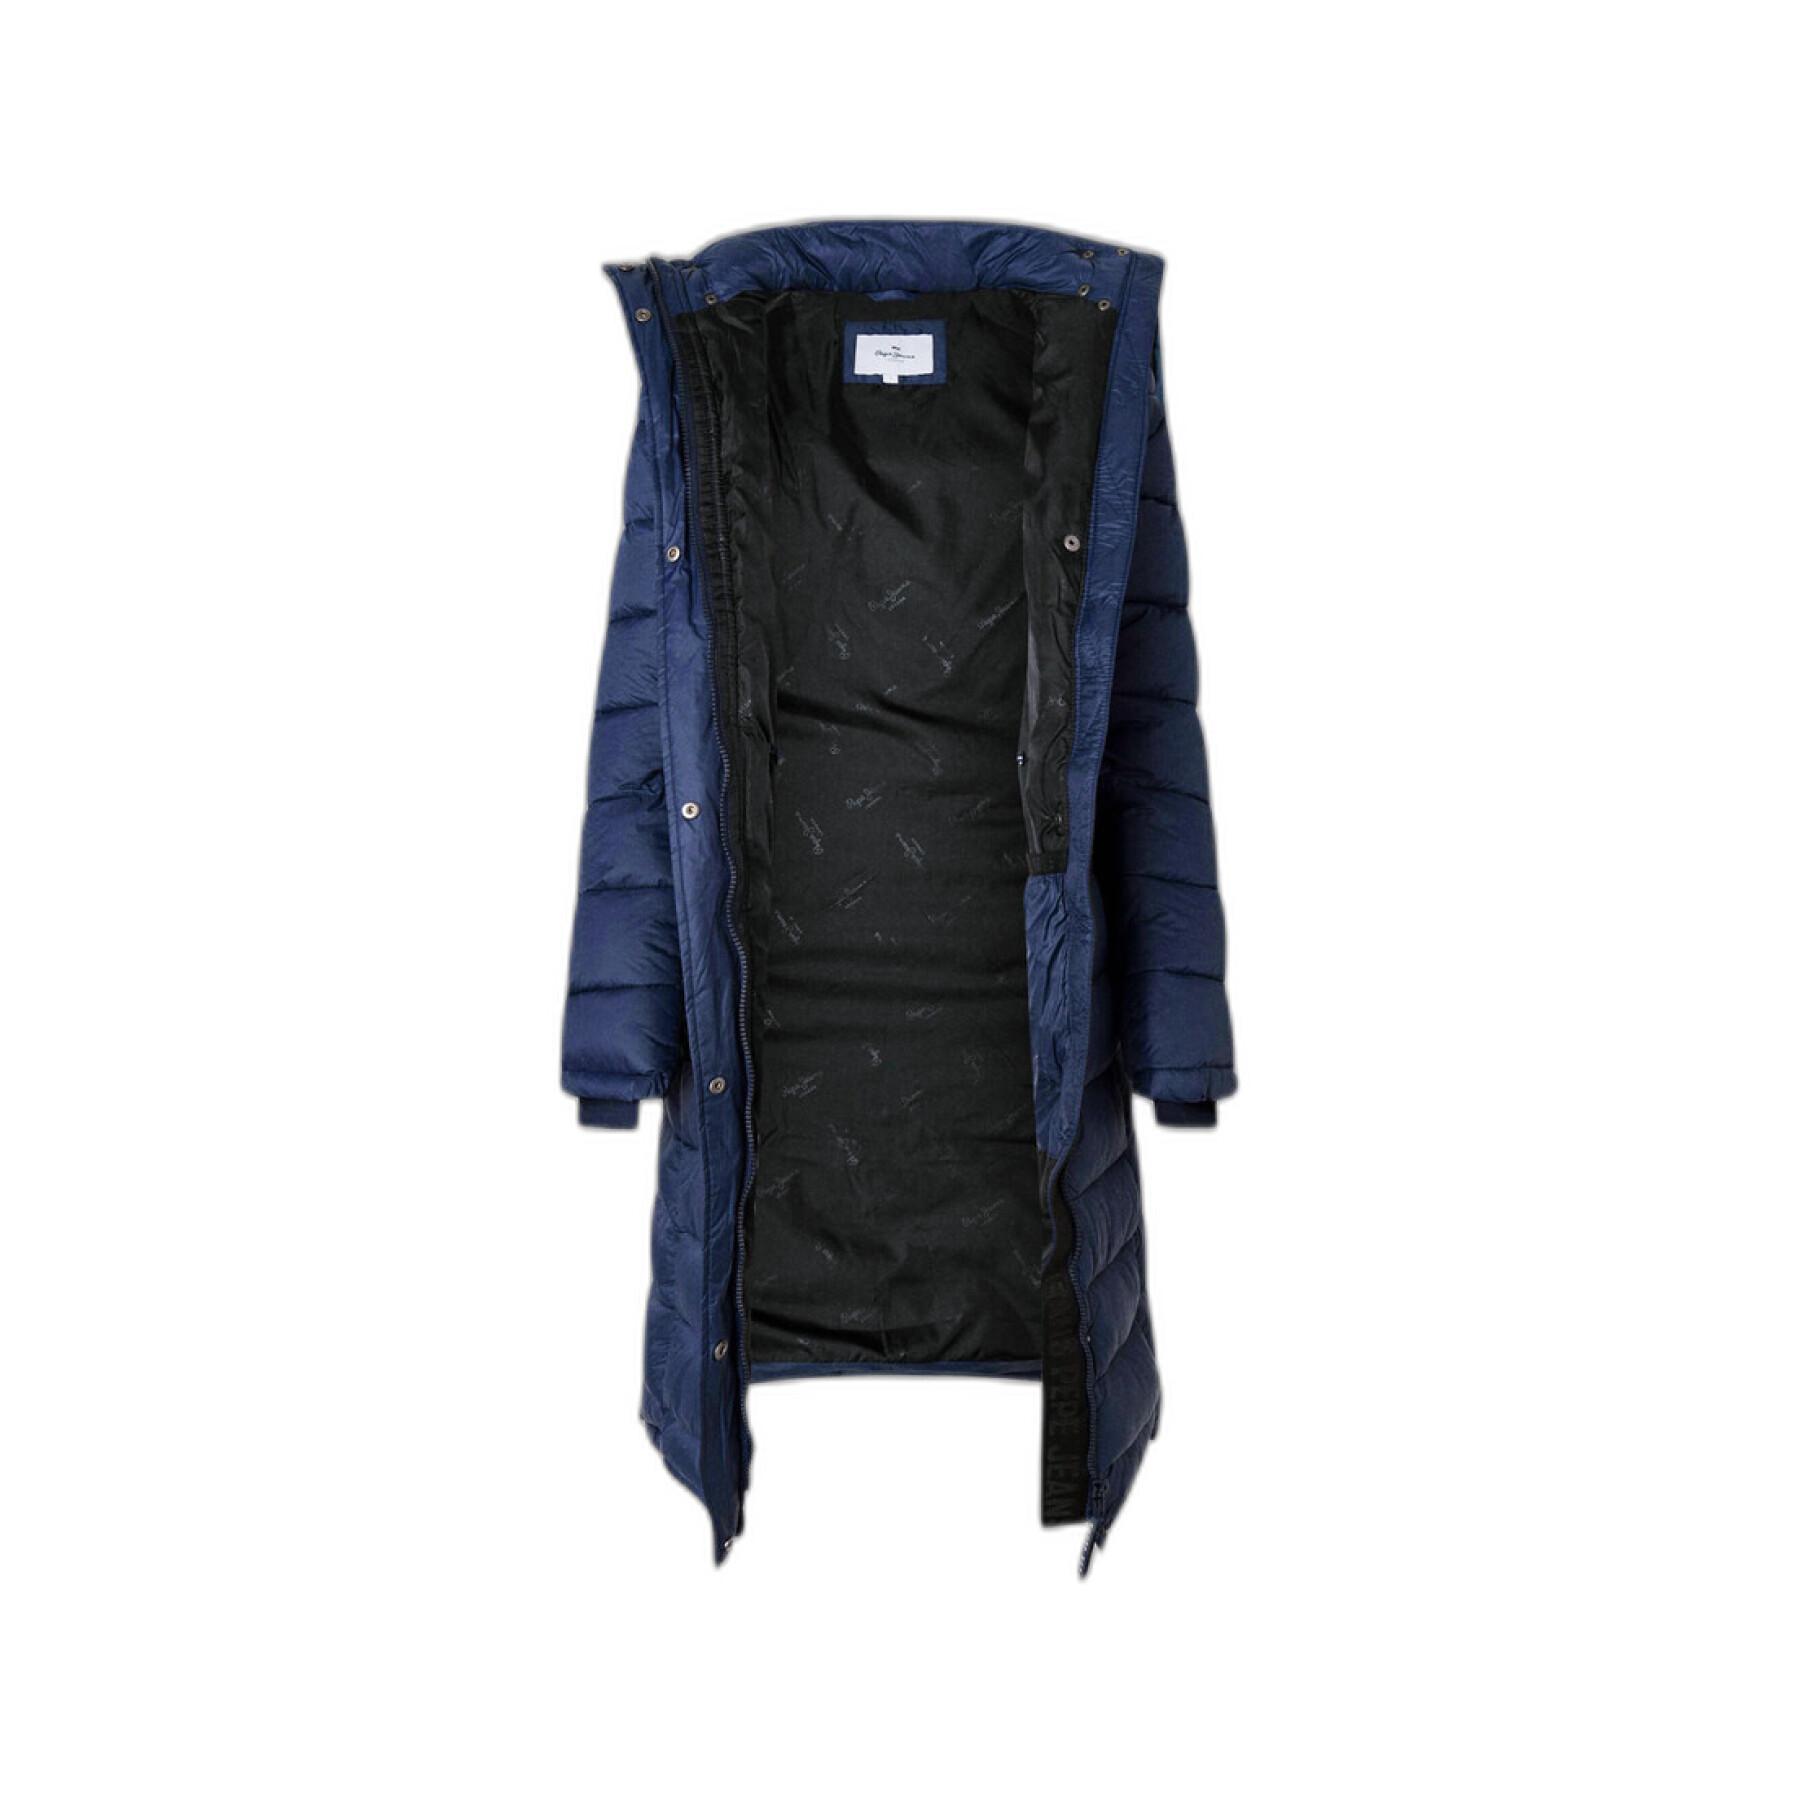 Long Puffer Jacket Pepe Jeans May